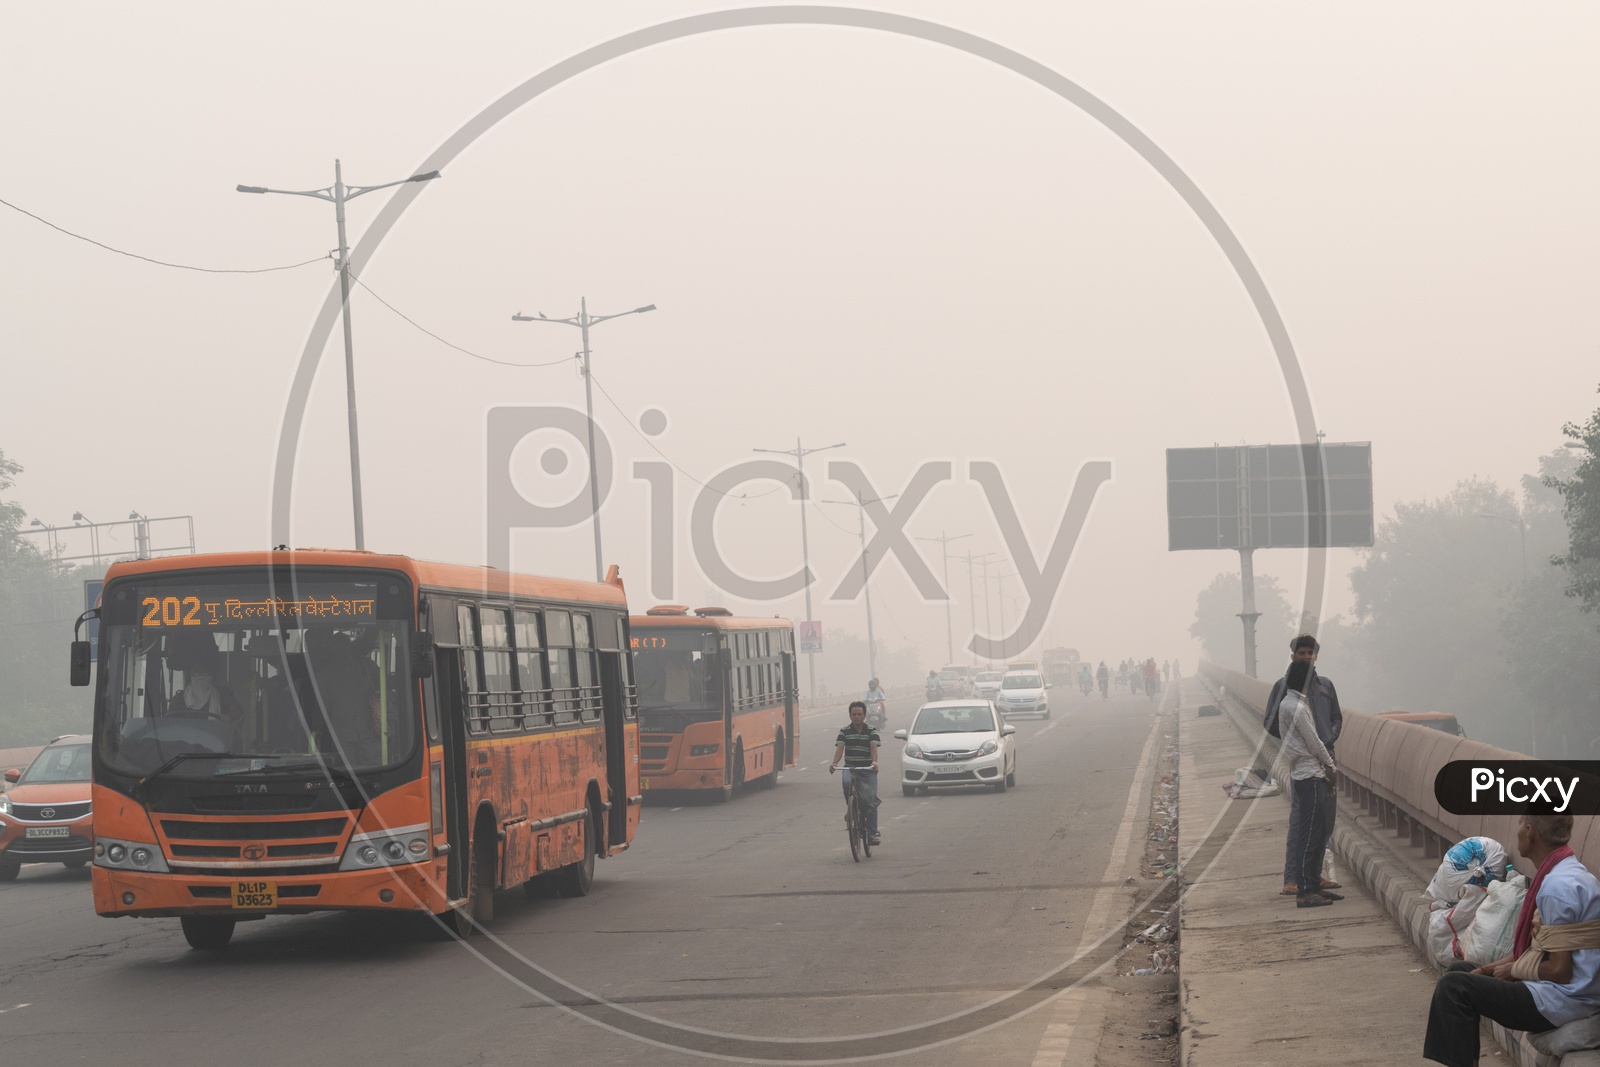 Low visibility due to Pollution(smog) at severe level in Delhi NCR after Diwali